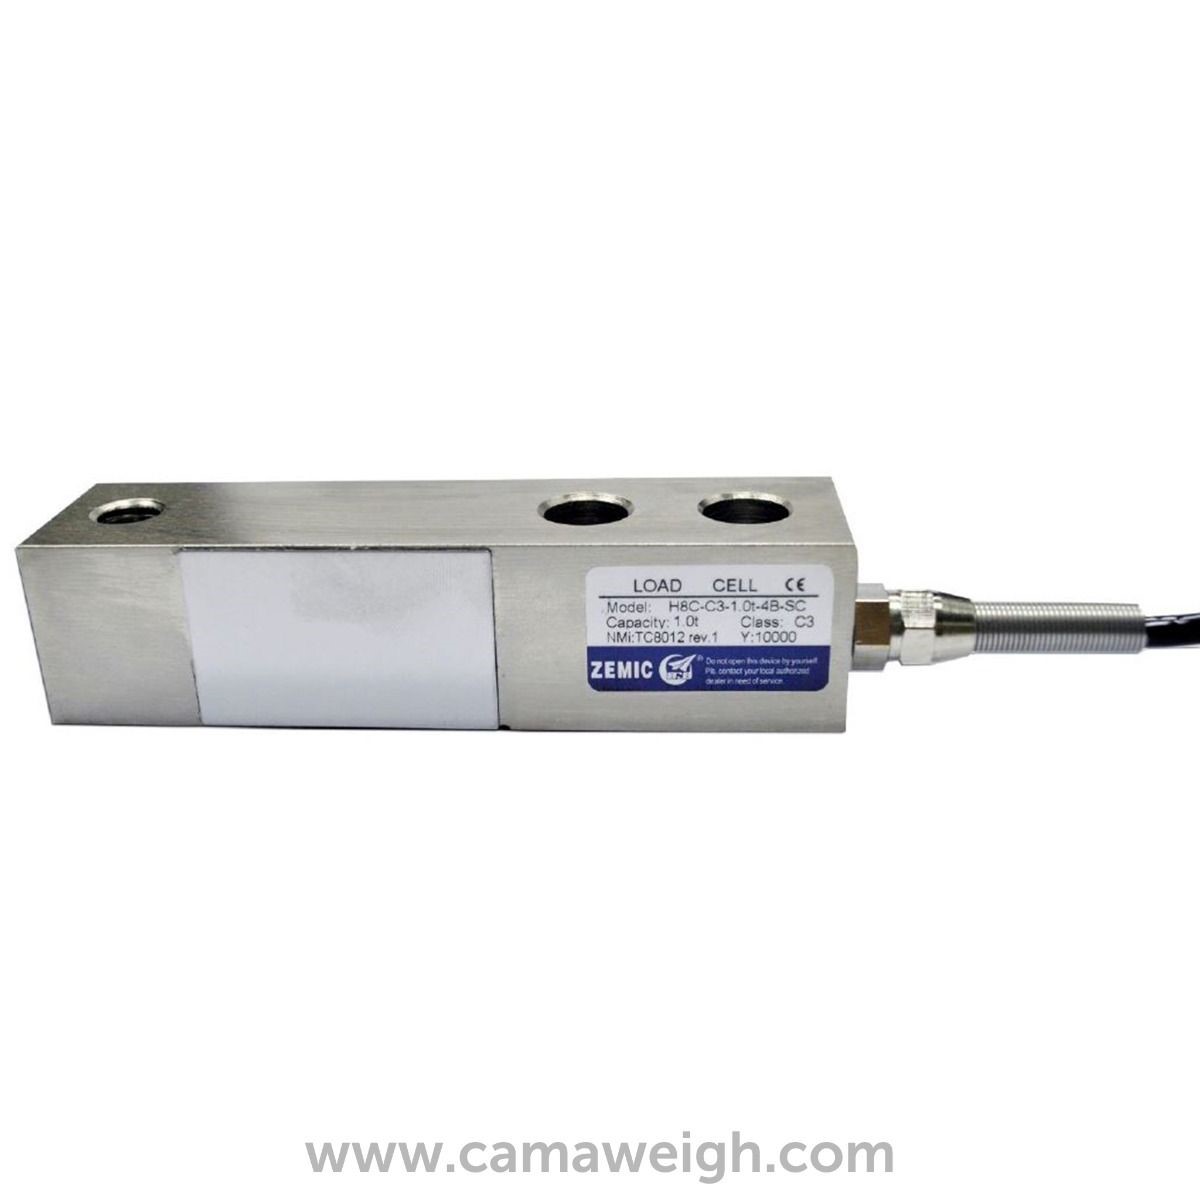 Zemic Load Cell of 1 ton capacity for sale by Camaweigh